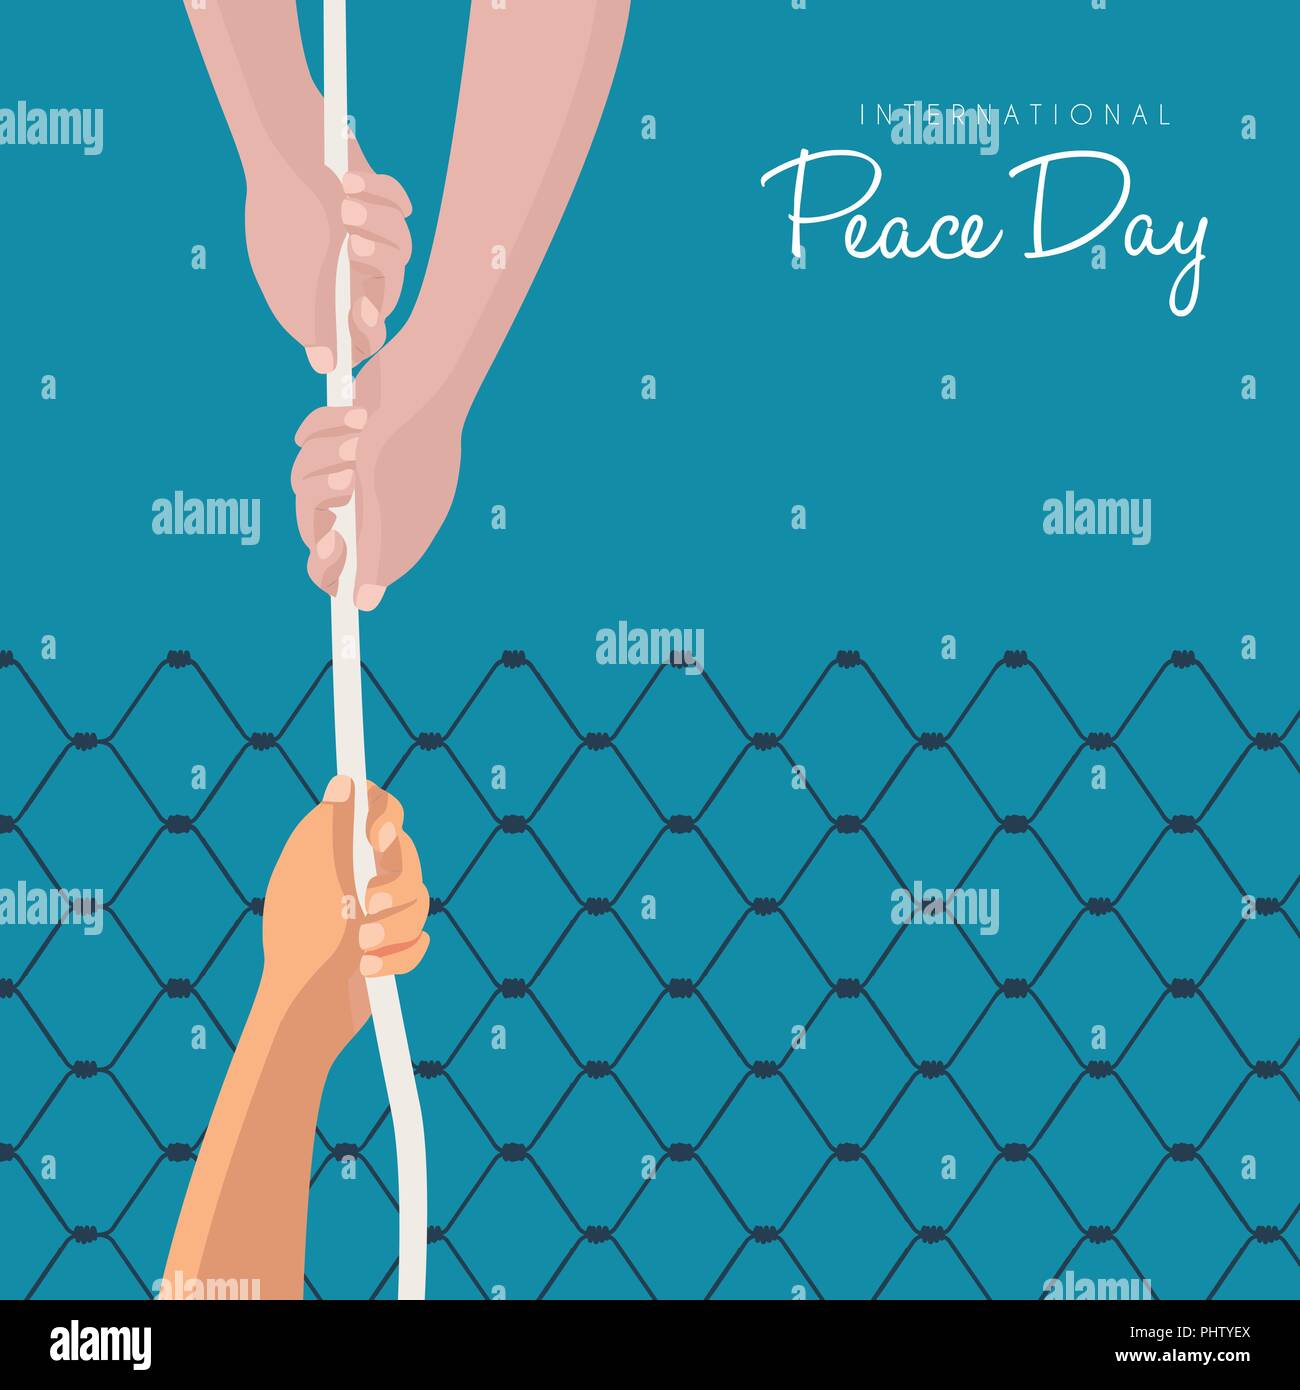 International Peace Day illustration for world help concept, hands rescuing people with rope to freedom. EPS10 vector. Stock Vector